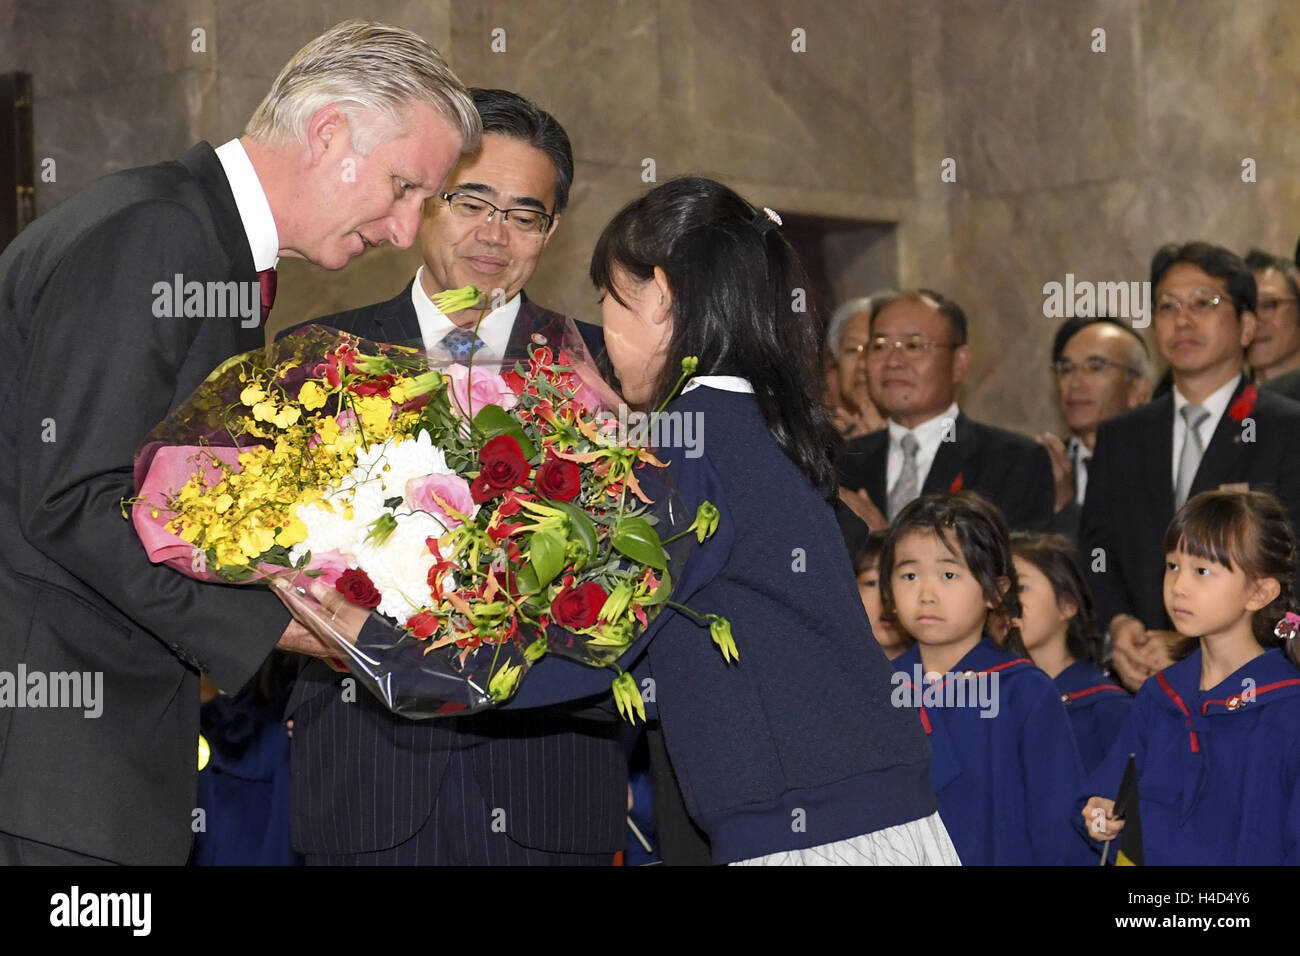 King Philippe - Filip of Belgium pictured during a reception on the occasion of the shipping of the 10th million car being shipped to Belgium, on day four of a state visit to Japan of the Belgian Royals, Thursday 13 October 2016, in Nagoya, Japan. BELGA PHOTO POOL FRED SIERAKOWSKI Stock Photo